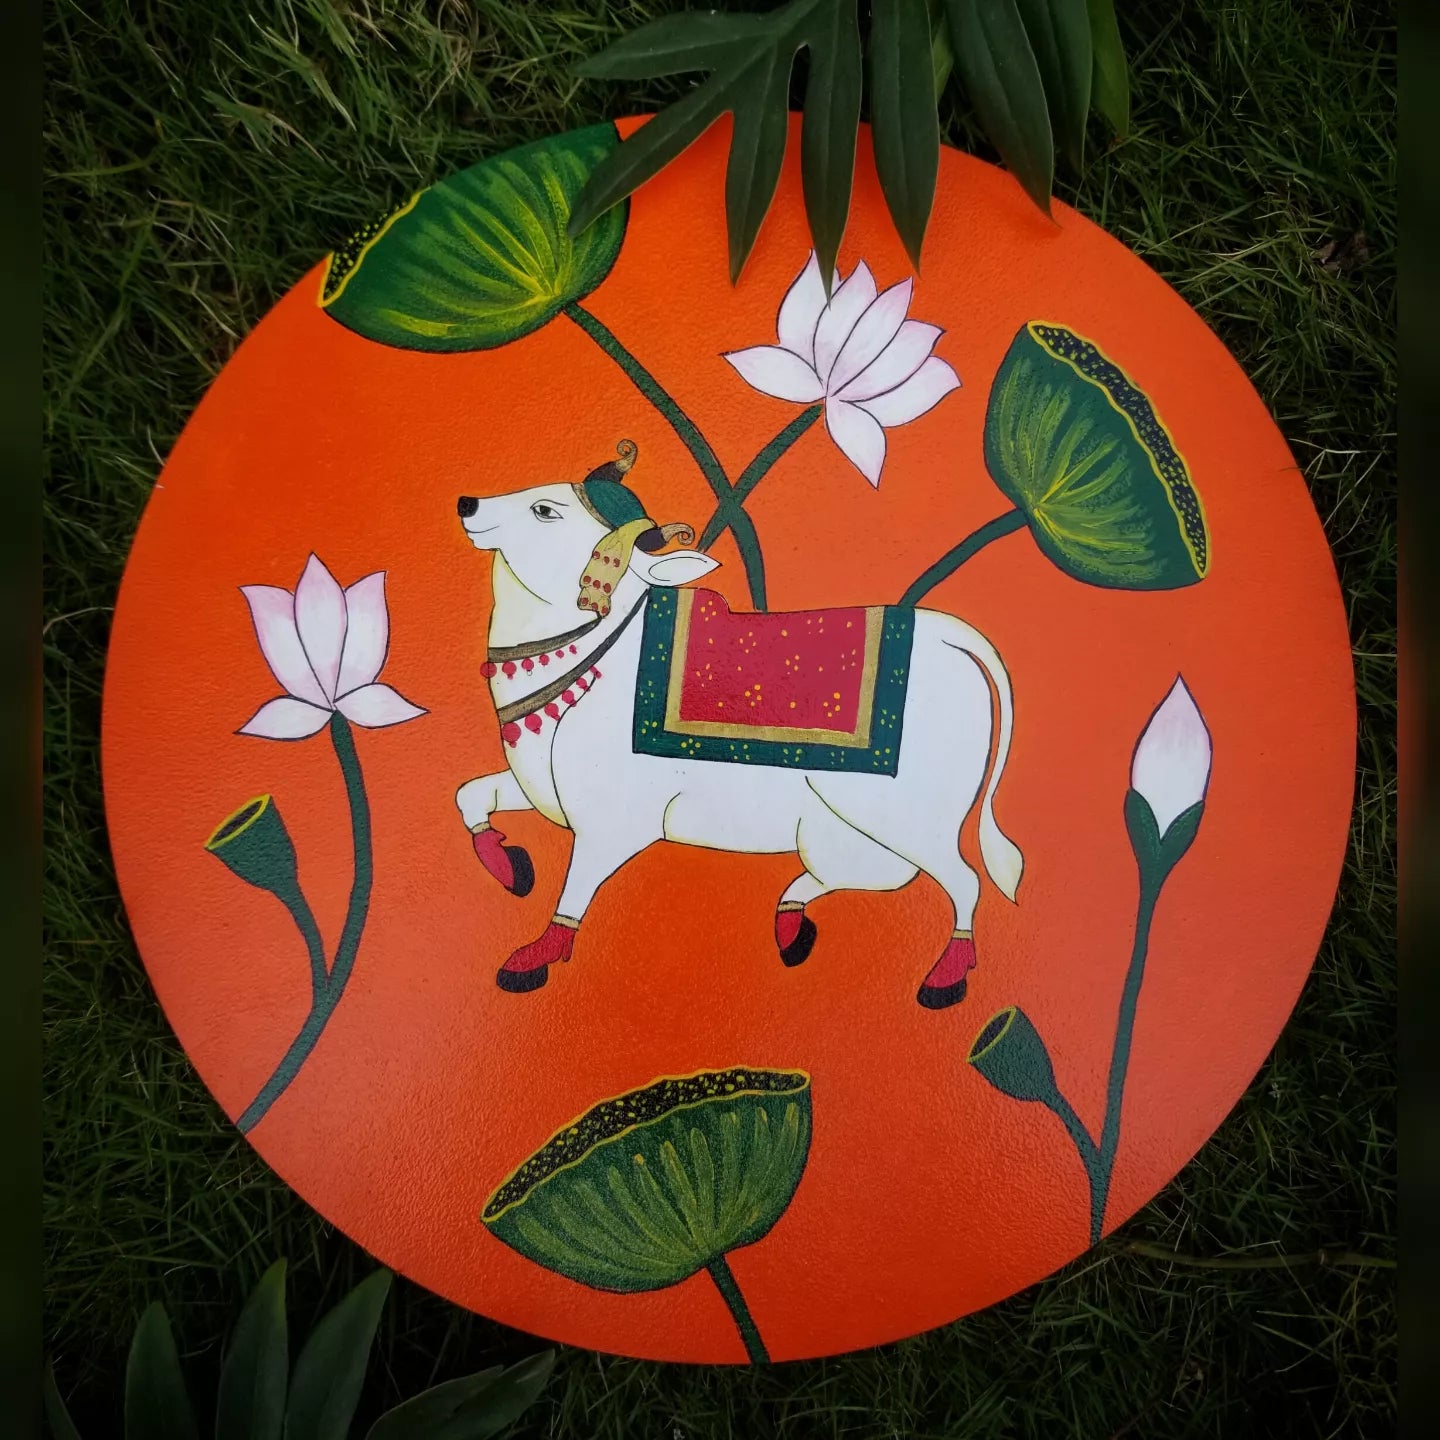 Round Shape Pichwai Cow Wall Painting for Living Room 12X12 inch